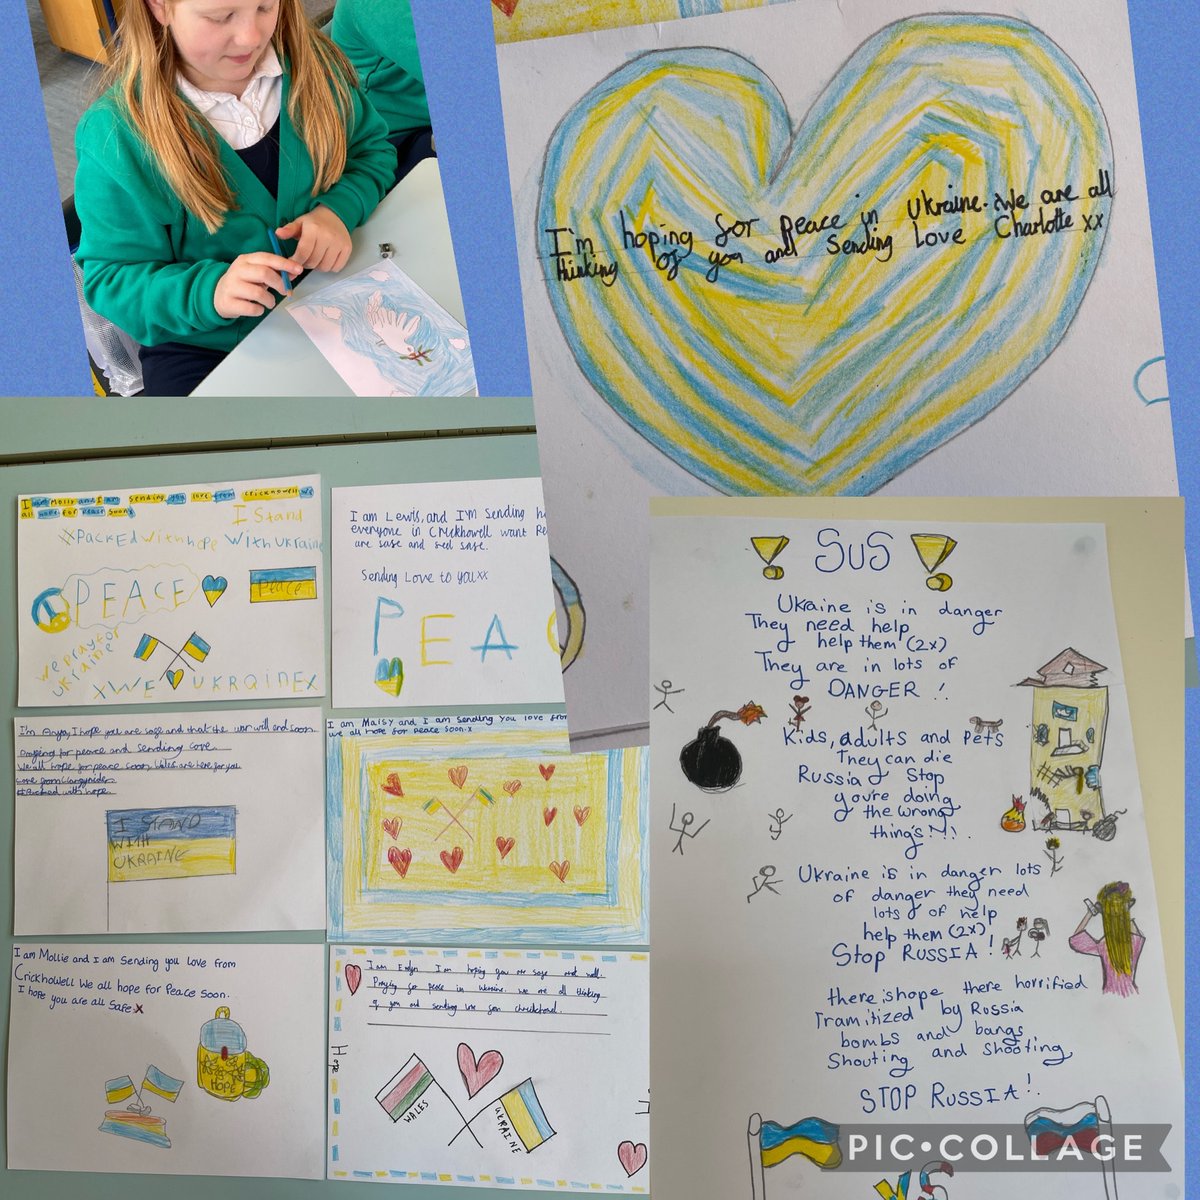 Our compassionate and caring Y4 pupils writing postcards and poems, one titled Save Ukrainian Souls 🇺🇦 
#packedwithhope 
@LittleToller 
@Bookishcrick